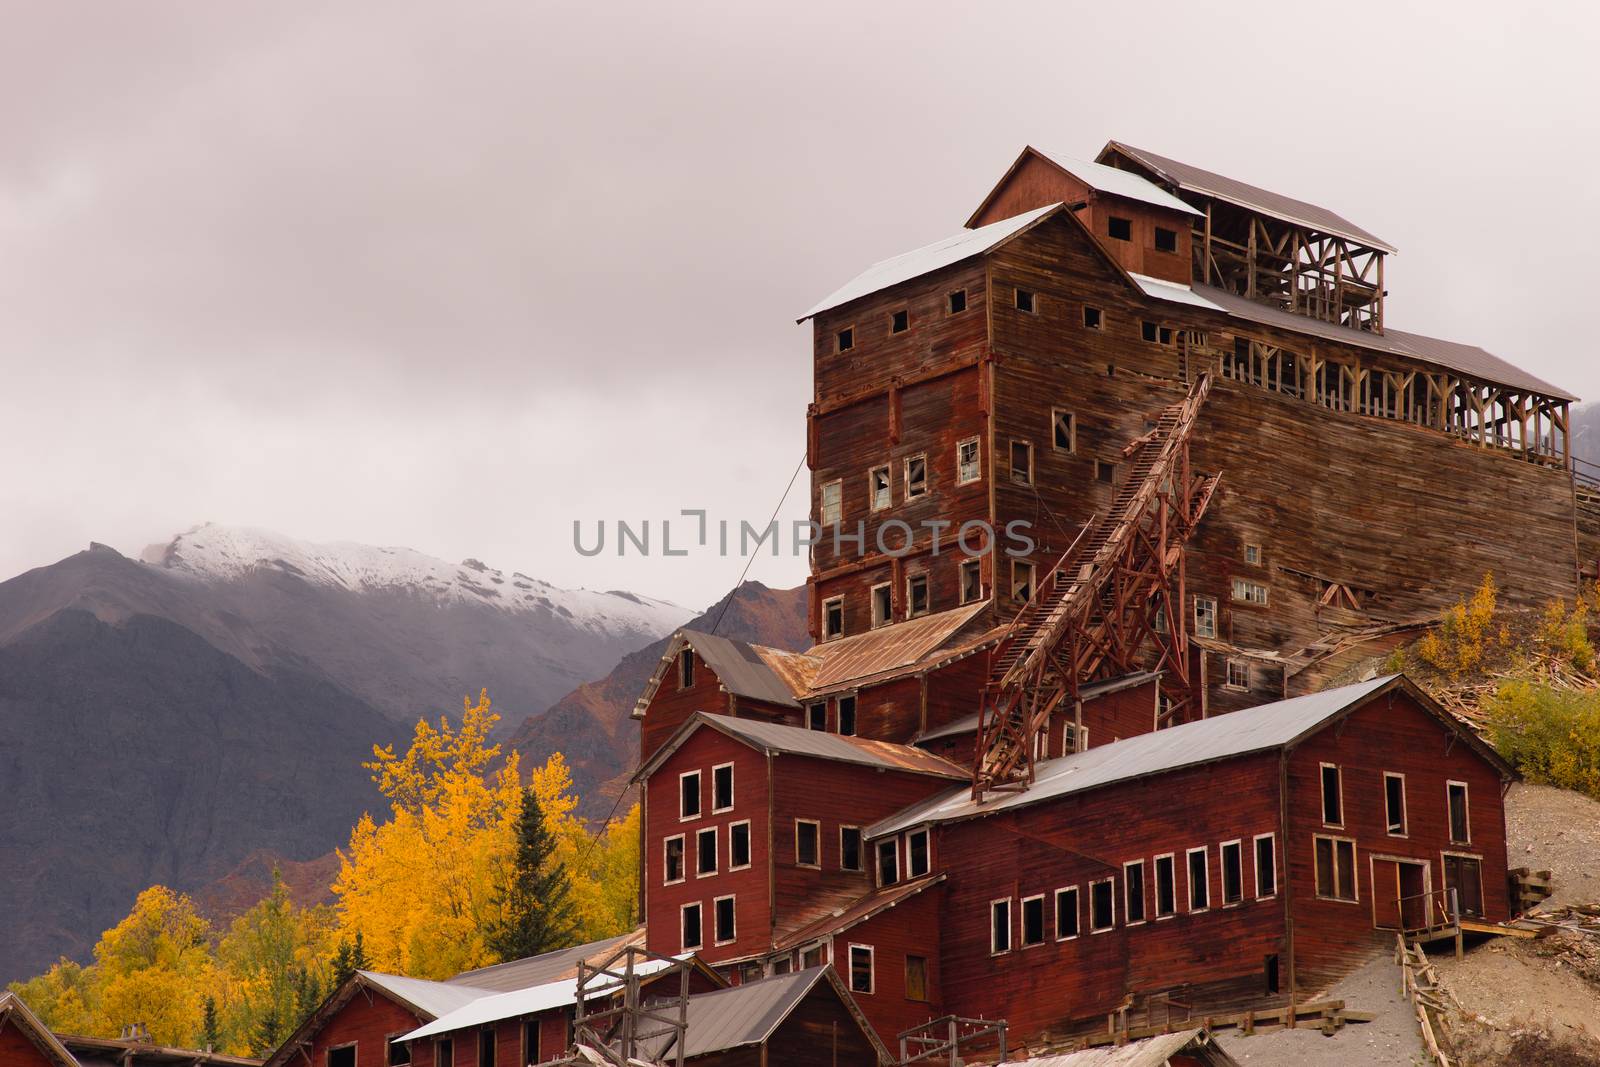 Wrangell St Elias Kennecott Mines Concentration Mill Alaska Wild by ChrisBoswell